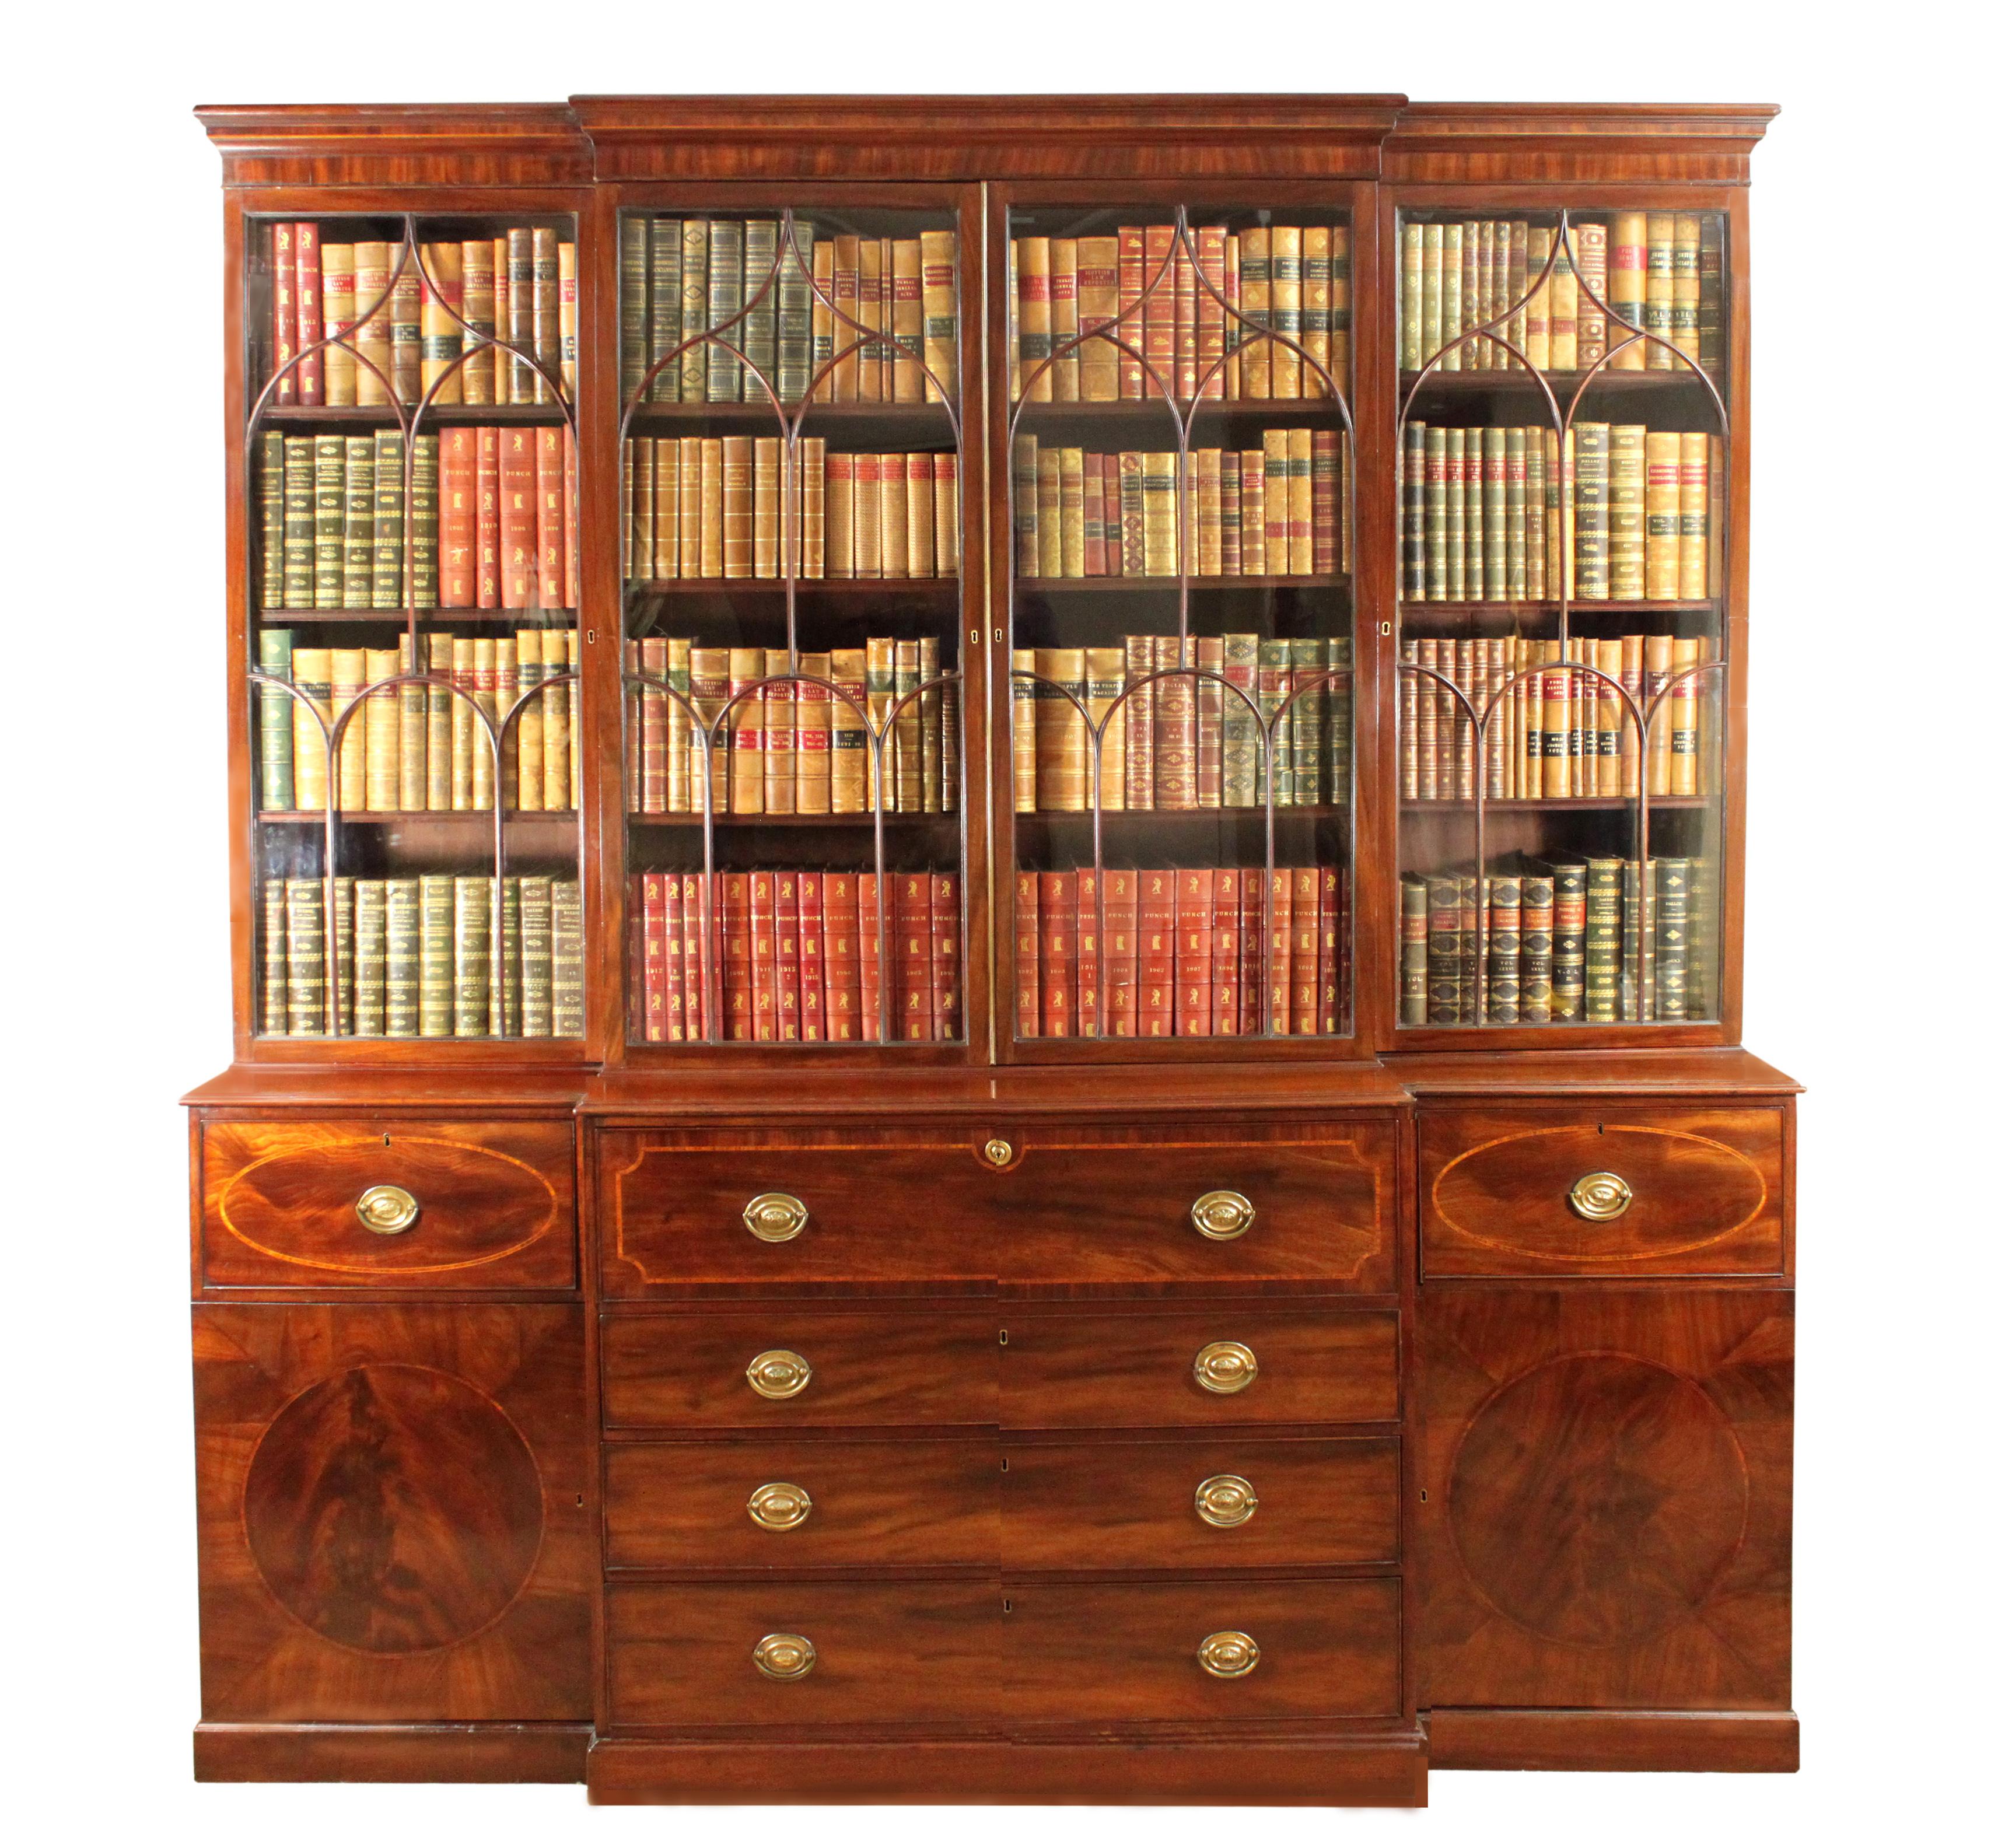 A fine George III Sheraton period mahogany breakfront bookcase with a well fitted secretaire drawer; arched glazing bars complete with the majority of the original glass. The base with attractive oval inlaid drawers and circles in the doors.